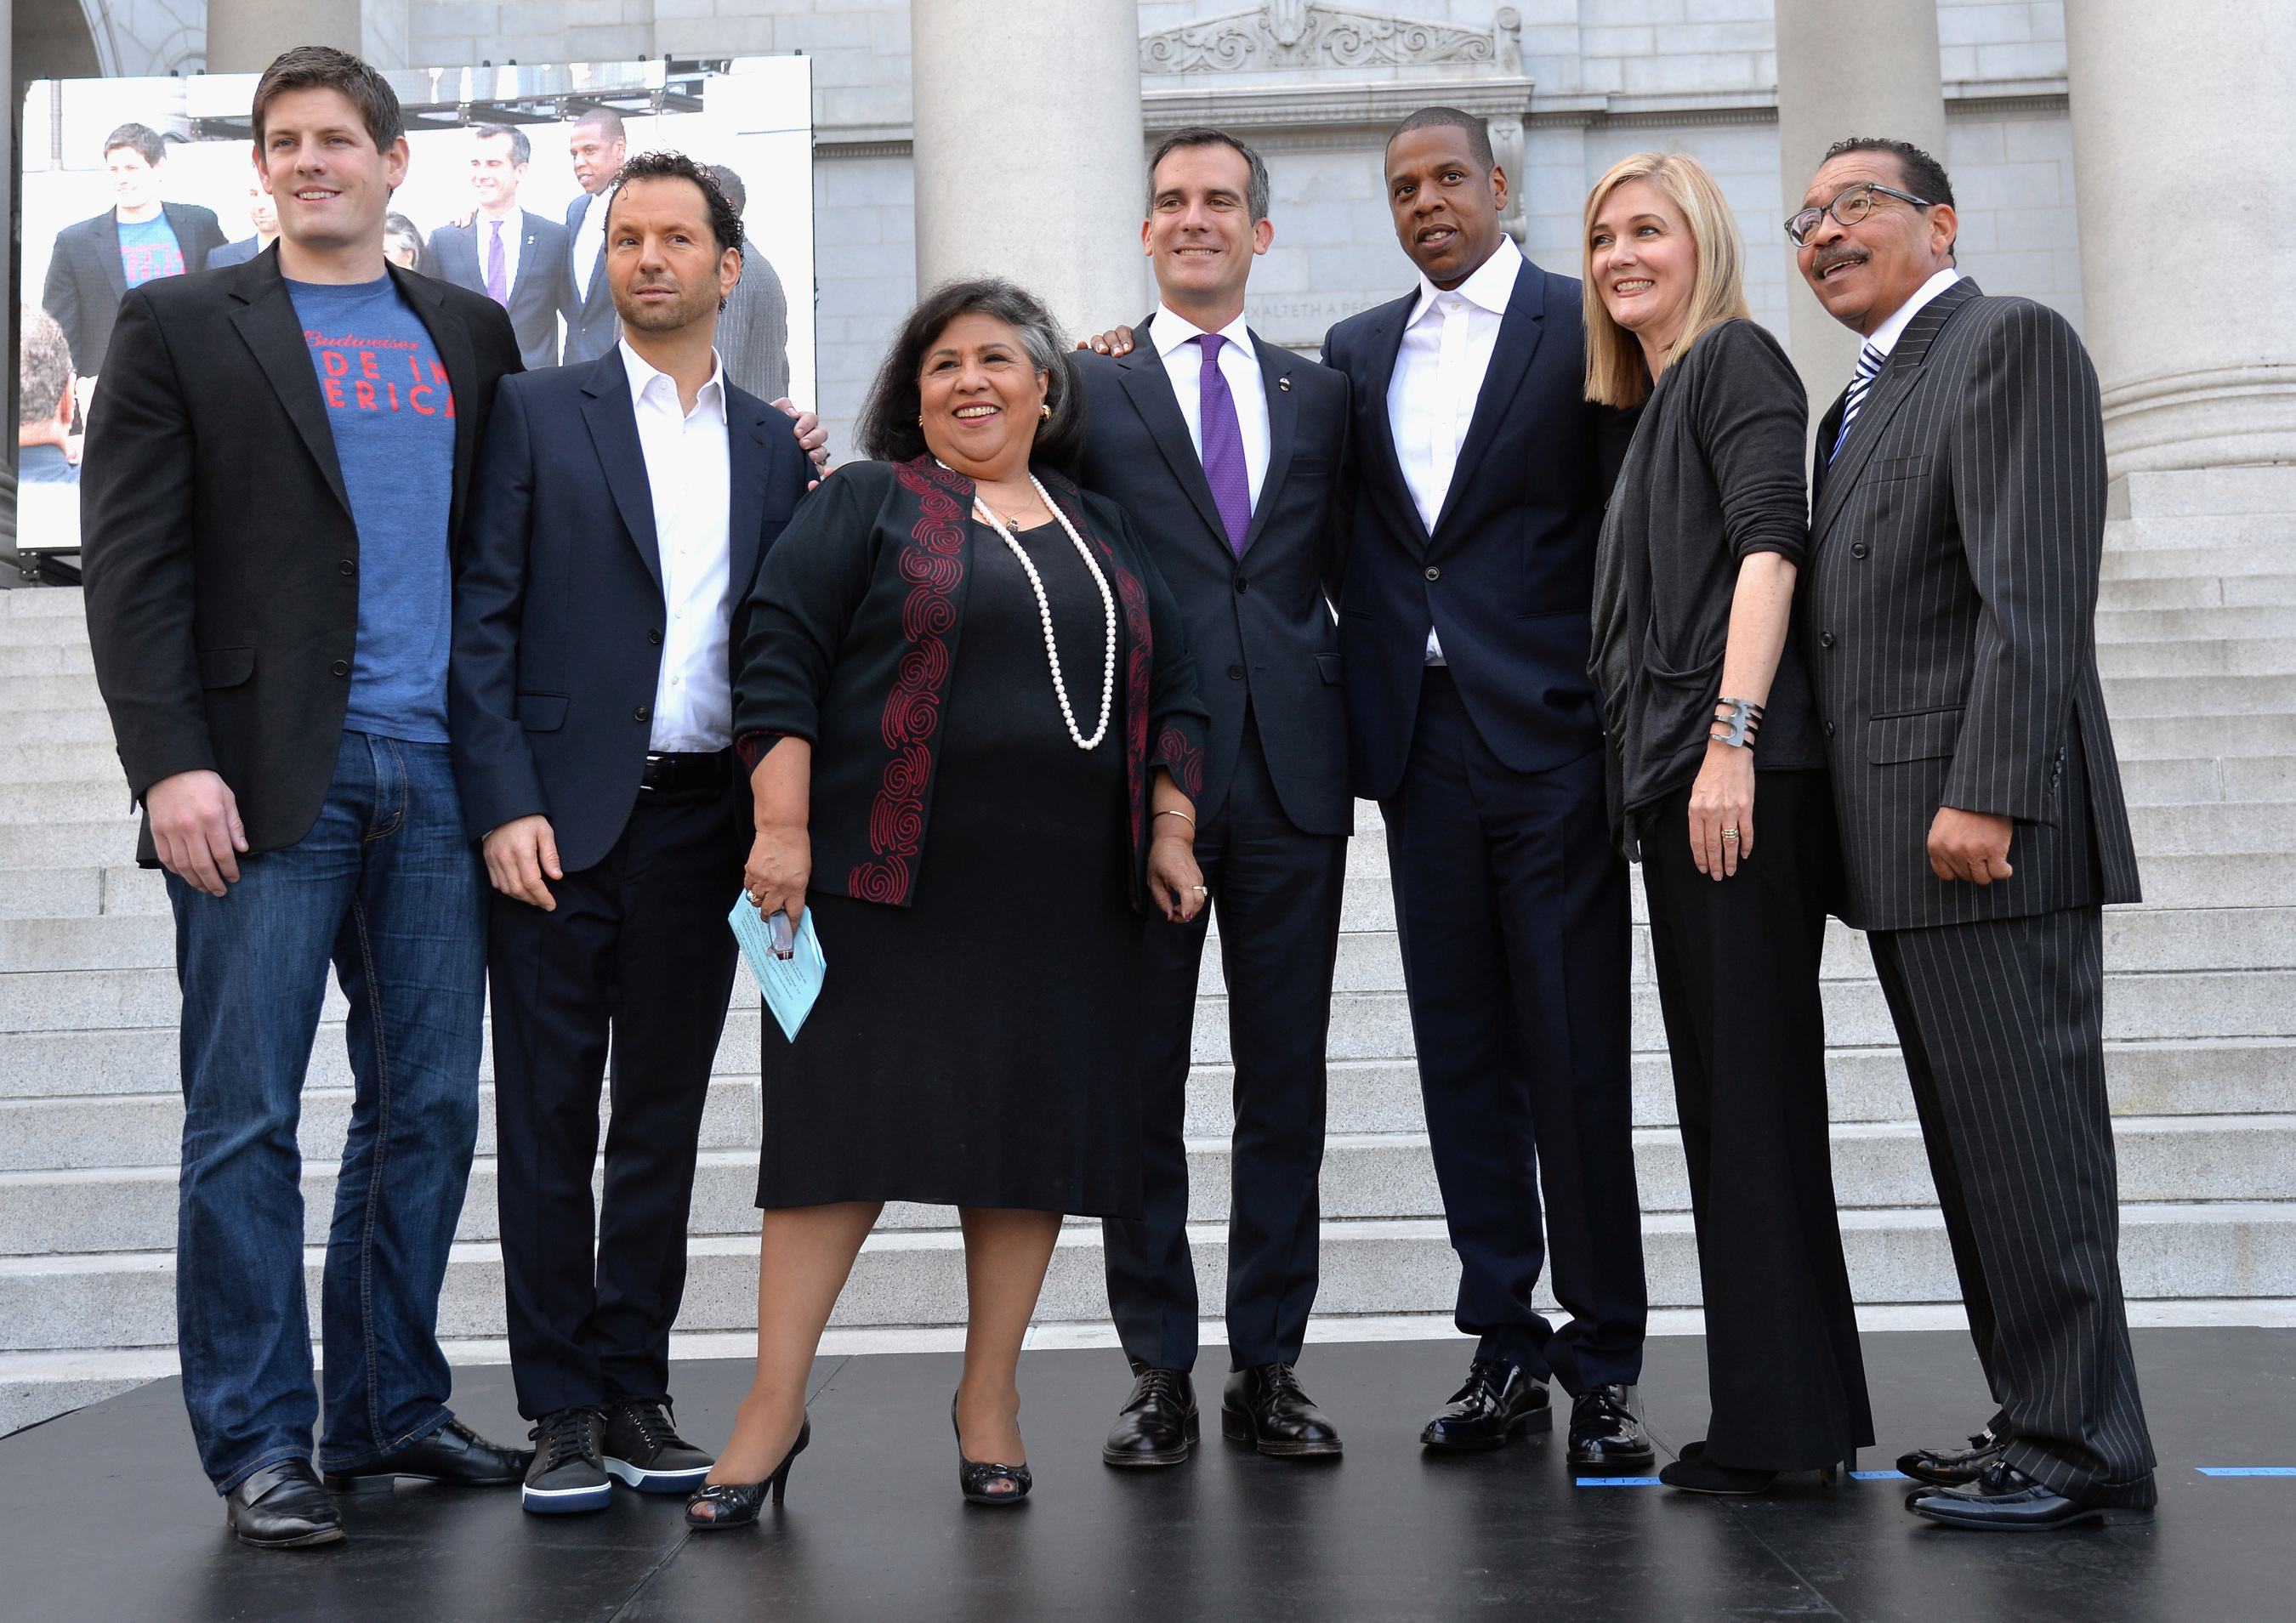 From left to right: Budweiser Vice President Brian Perkins, Michael Rapino of Live Nation, Los Angeles City Supervisor Gloria Molina, Mayor of Los Angeles Eric Garcetti, Shawn "Jay Z" Carter, Elise Buik of United Way Of Greater Los Angeles and Los Angeles City Council President Herb Wesson. (PRNewsFoto/Live Nation)